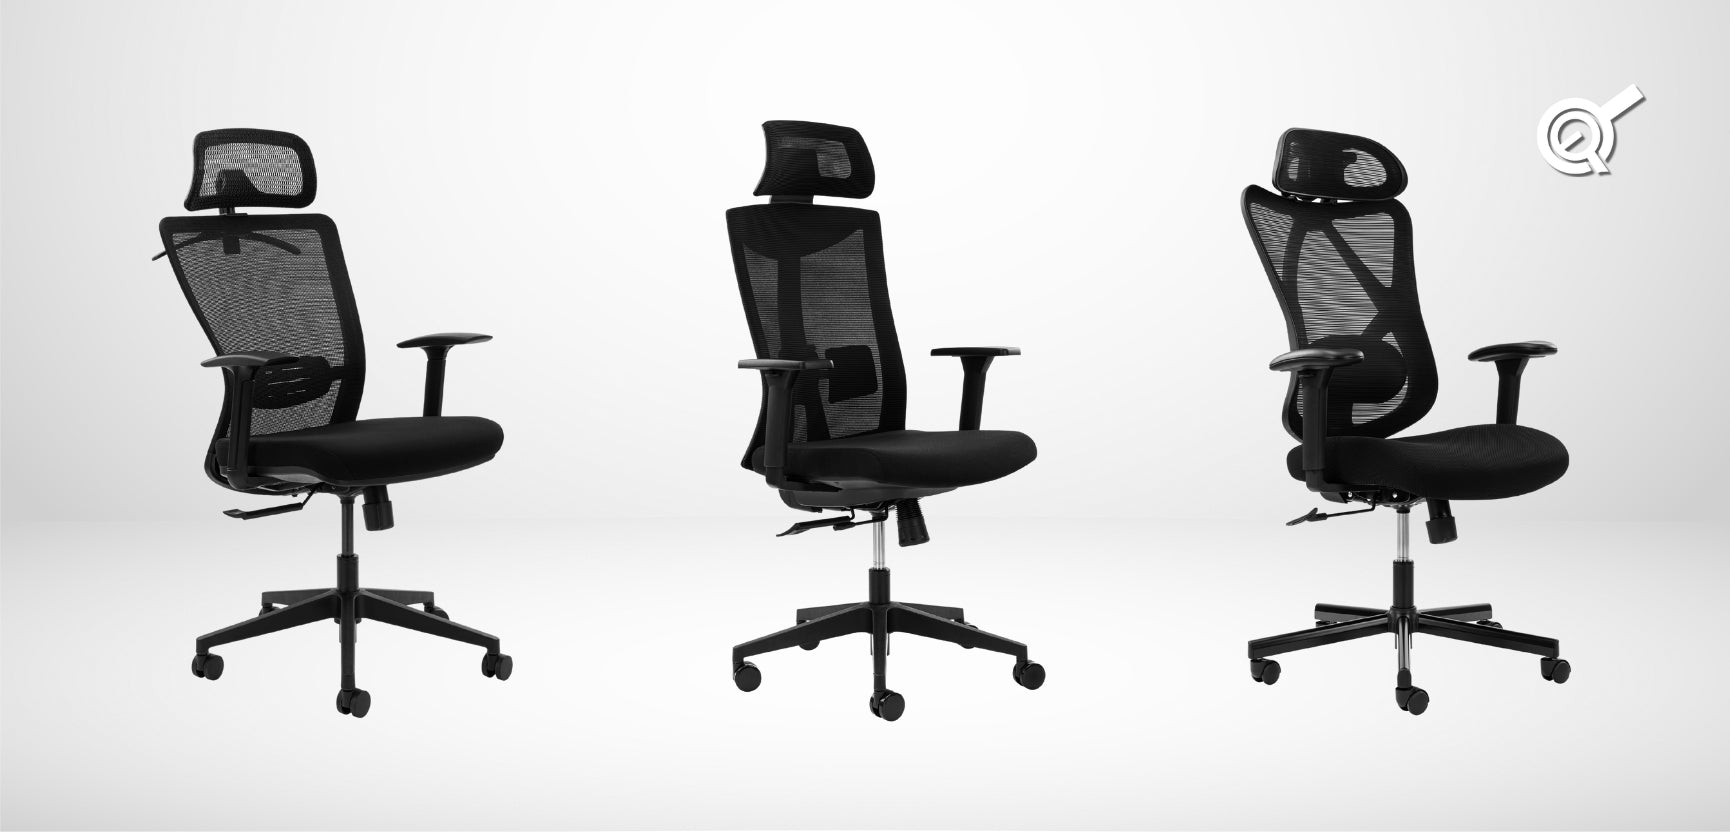  Ergonomic Home and Office Chairs